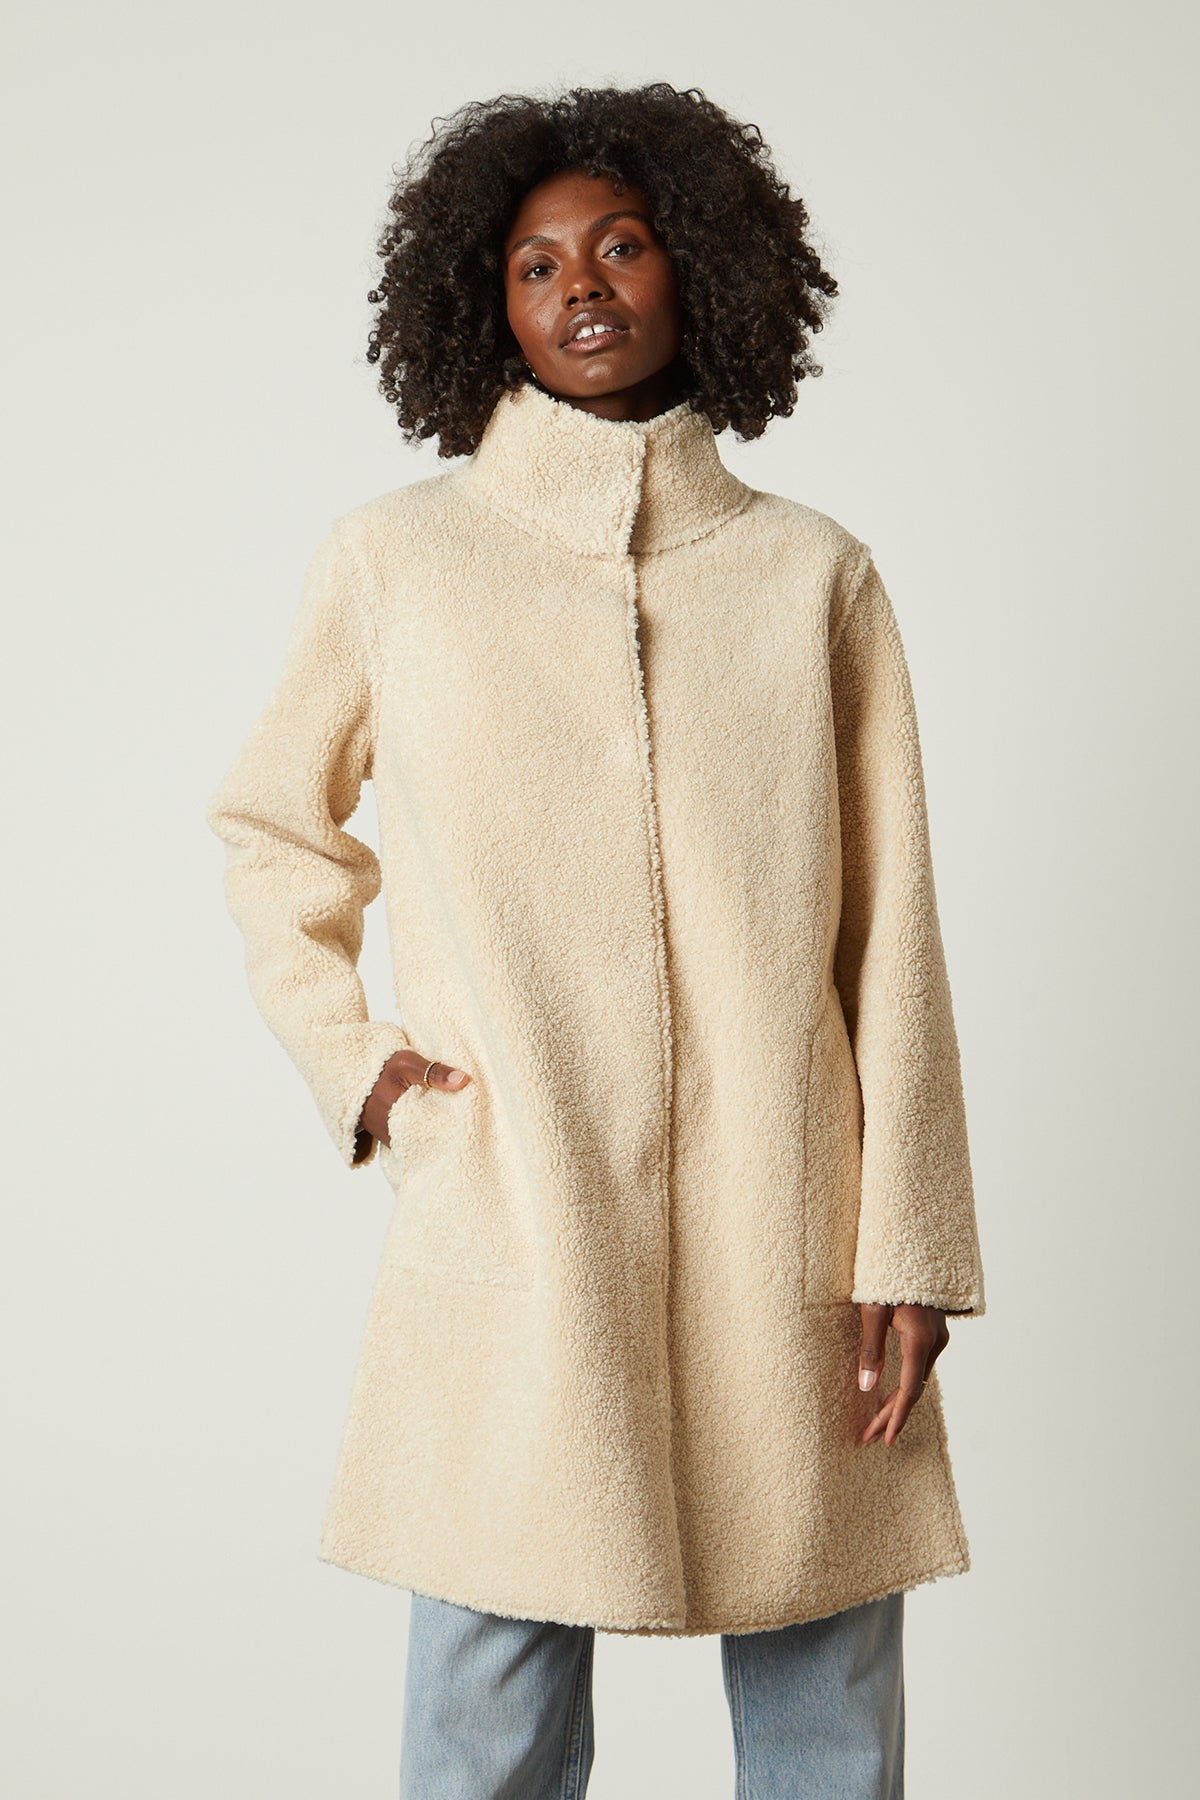 Mirabel Faux Lux Sherpa Reversible Coat in Sand Front-26683698053313